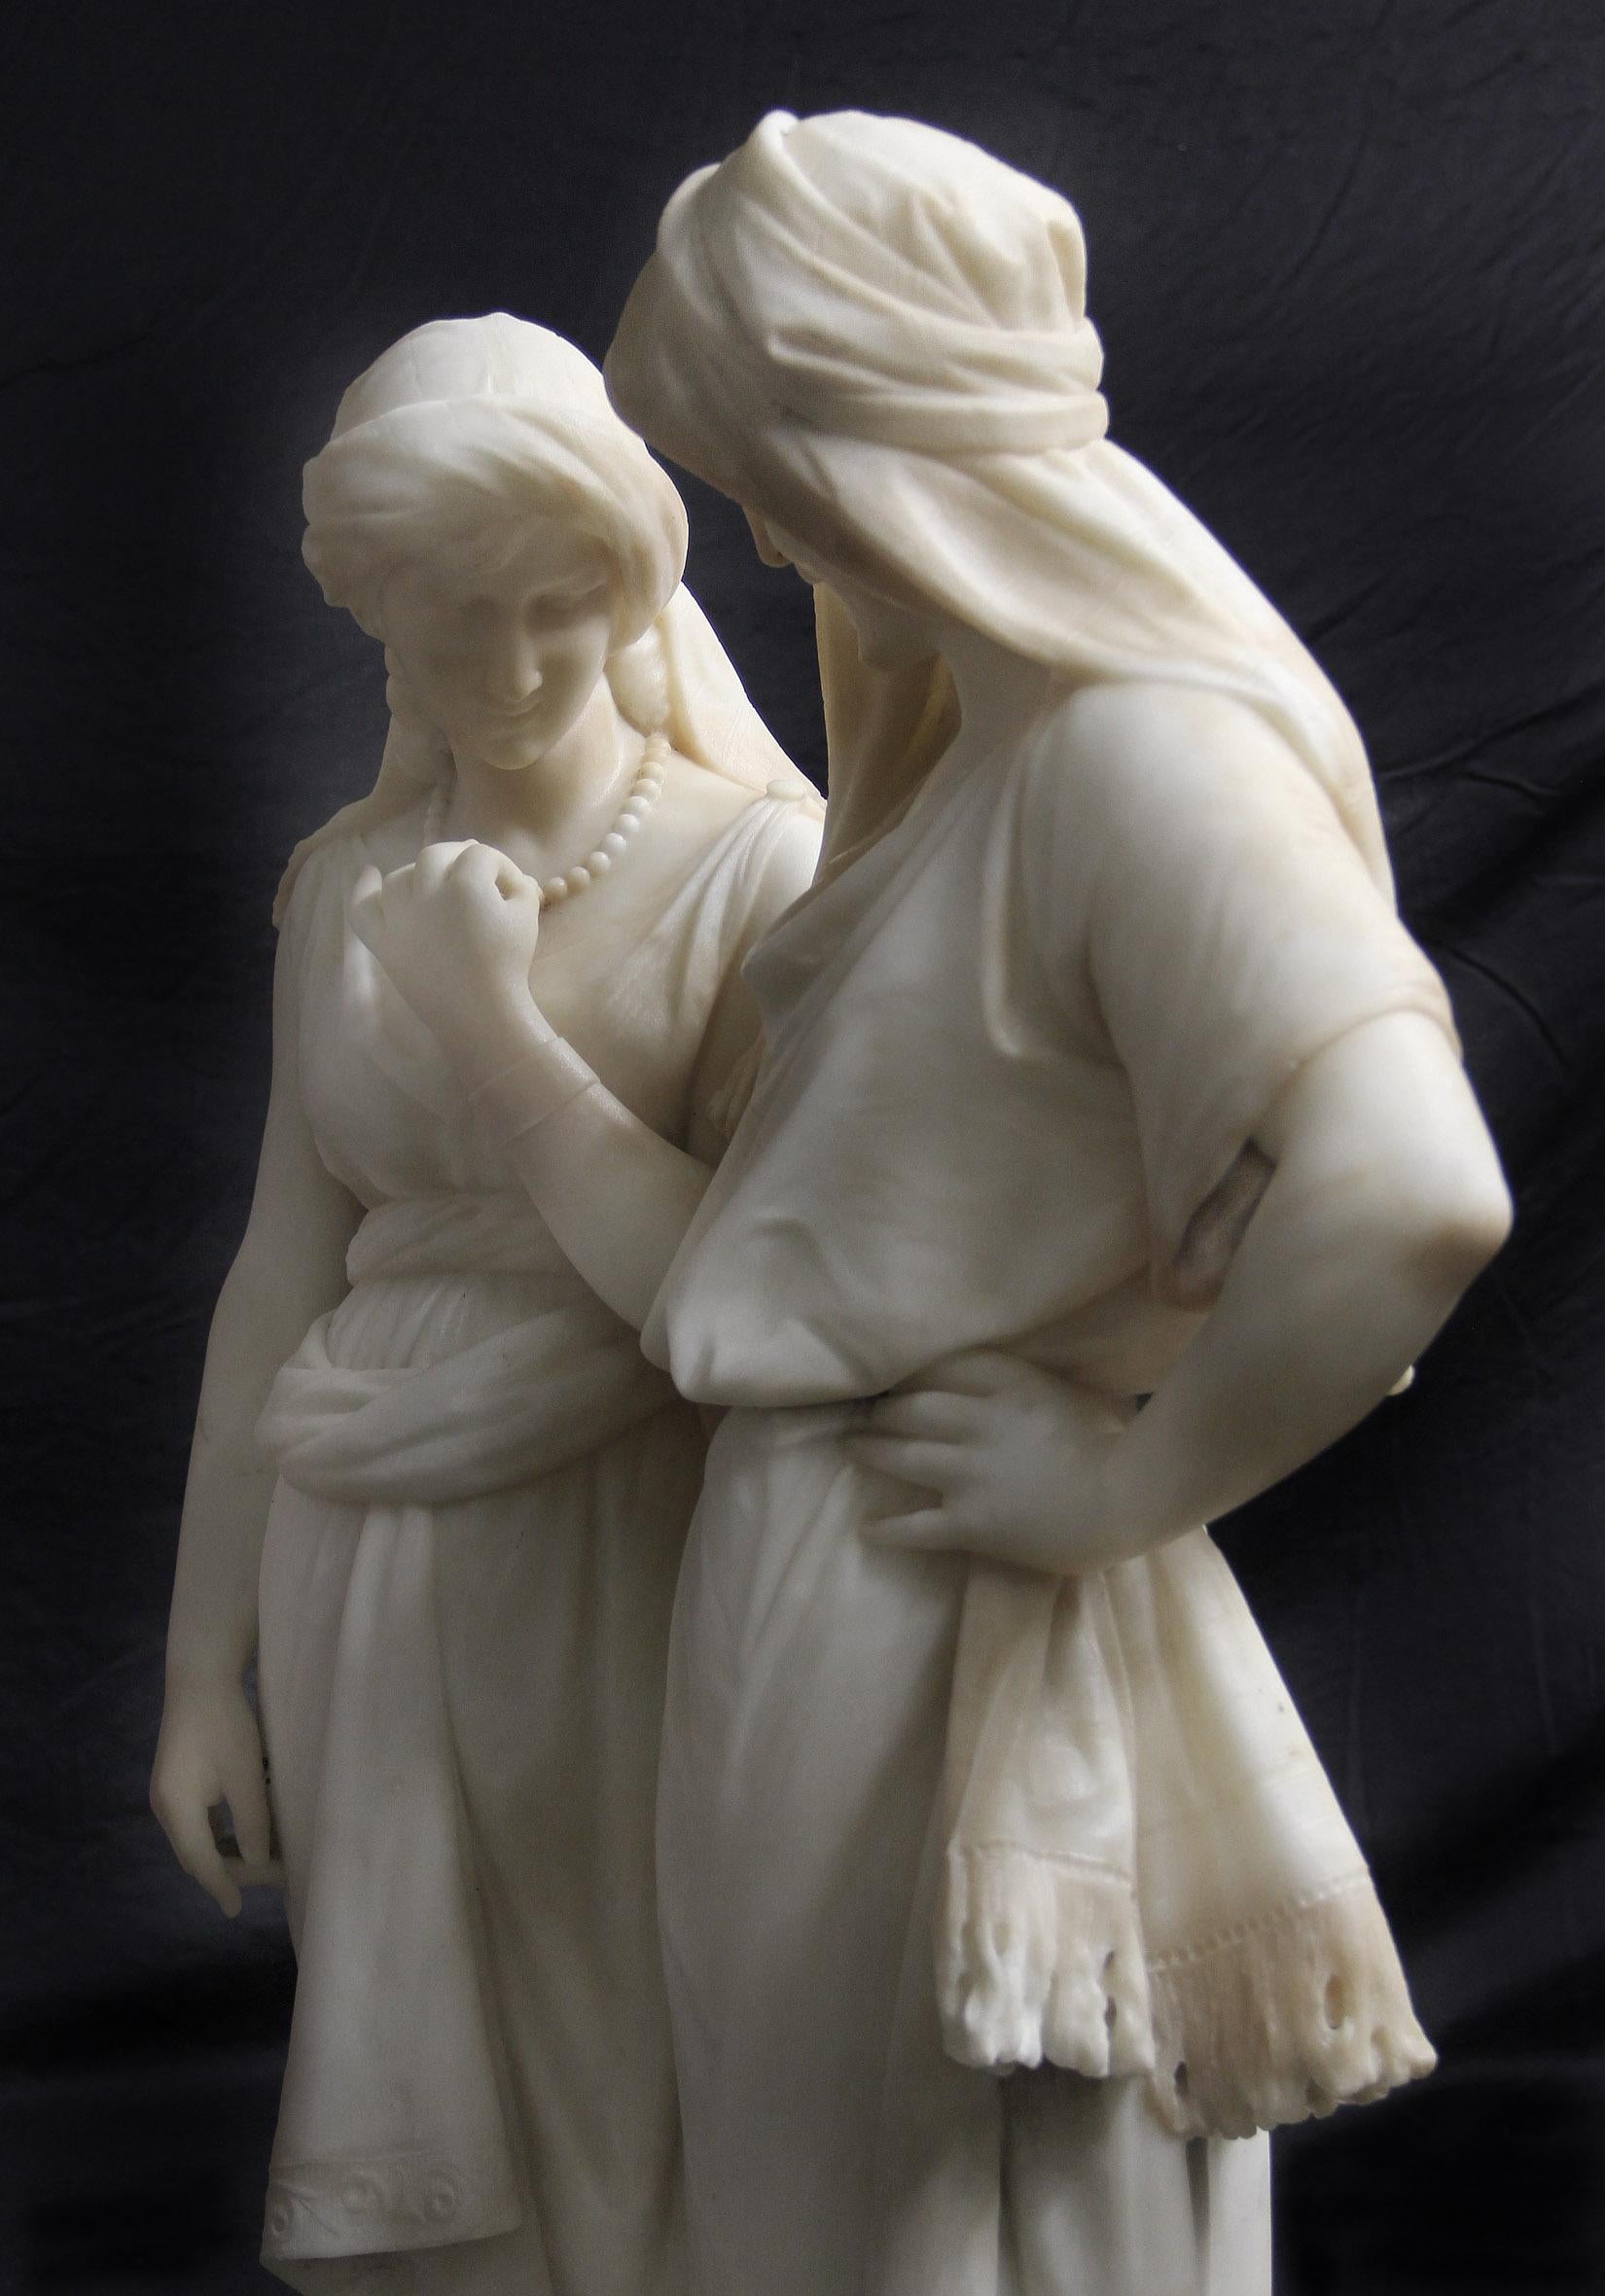 French 19th Century White Carrara Marble Entitled “Tendresse” by Émile-André Boisseau For Sale